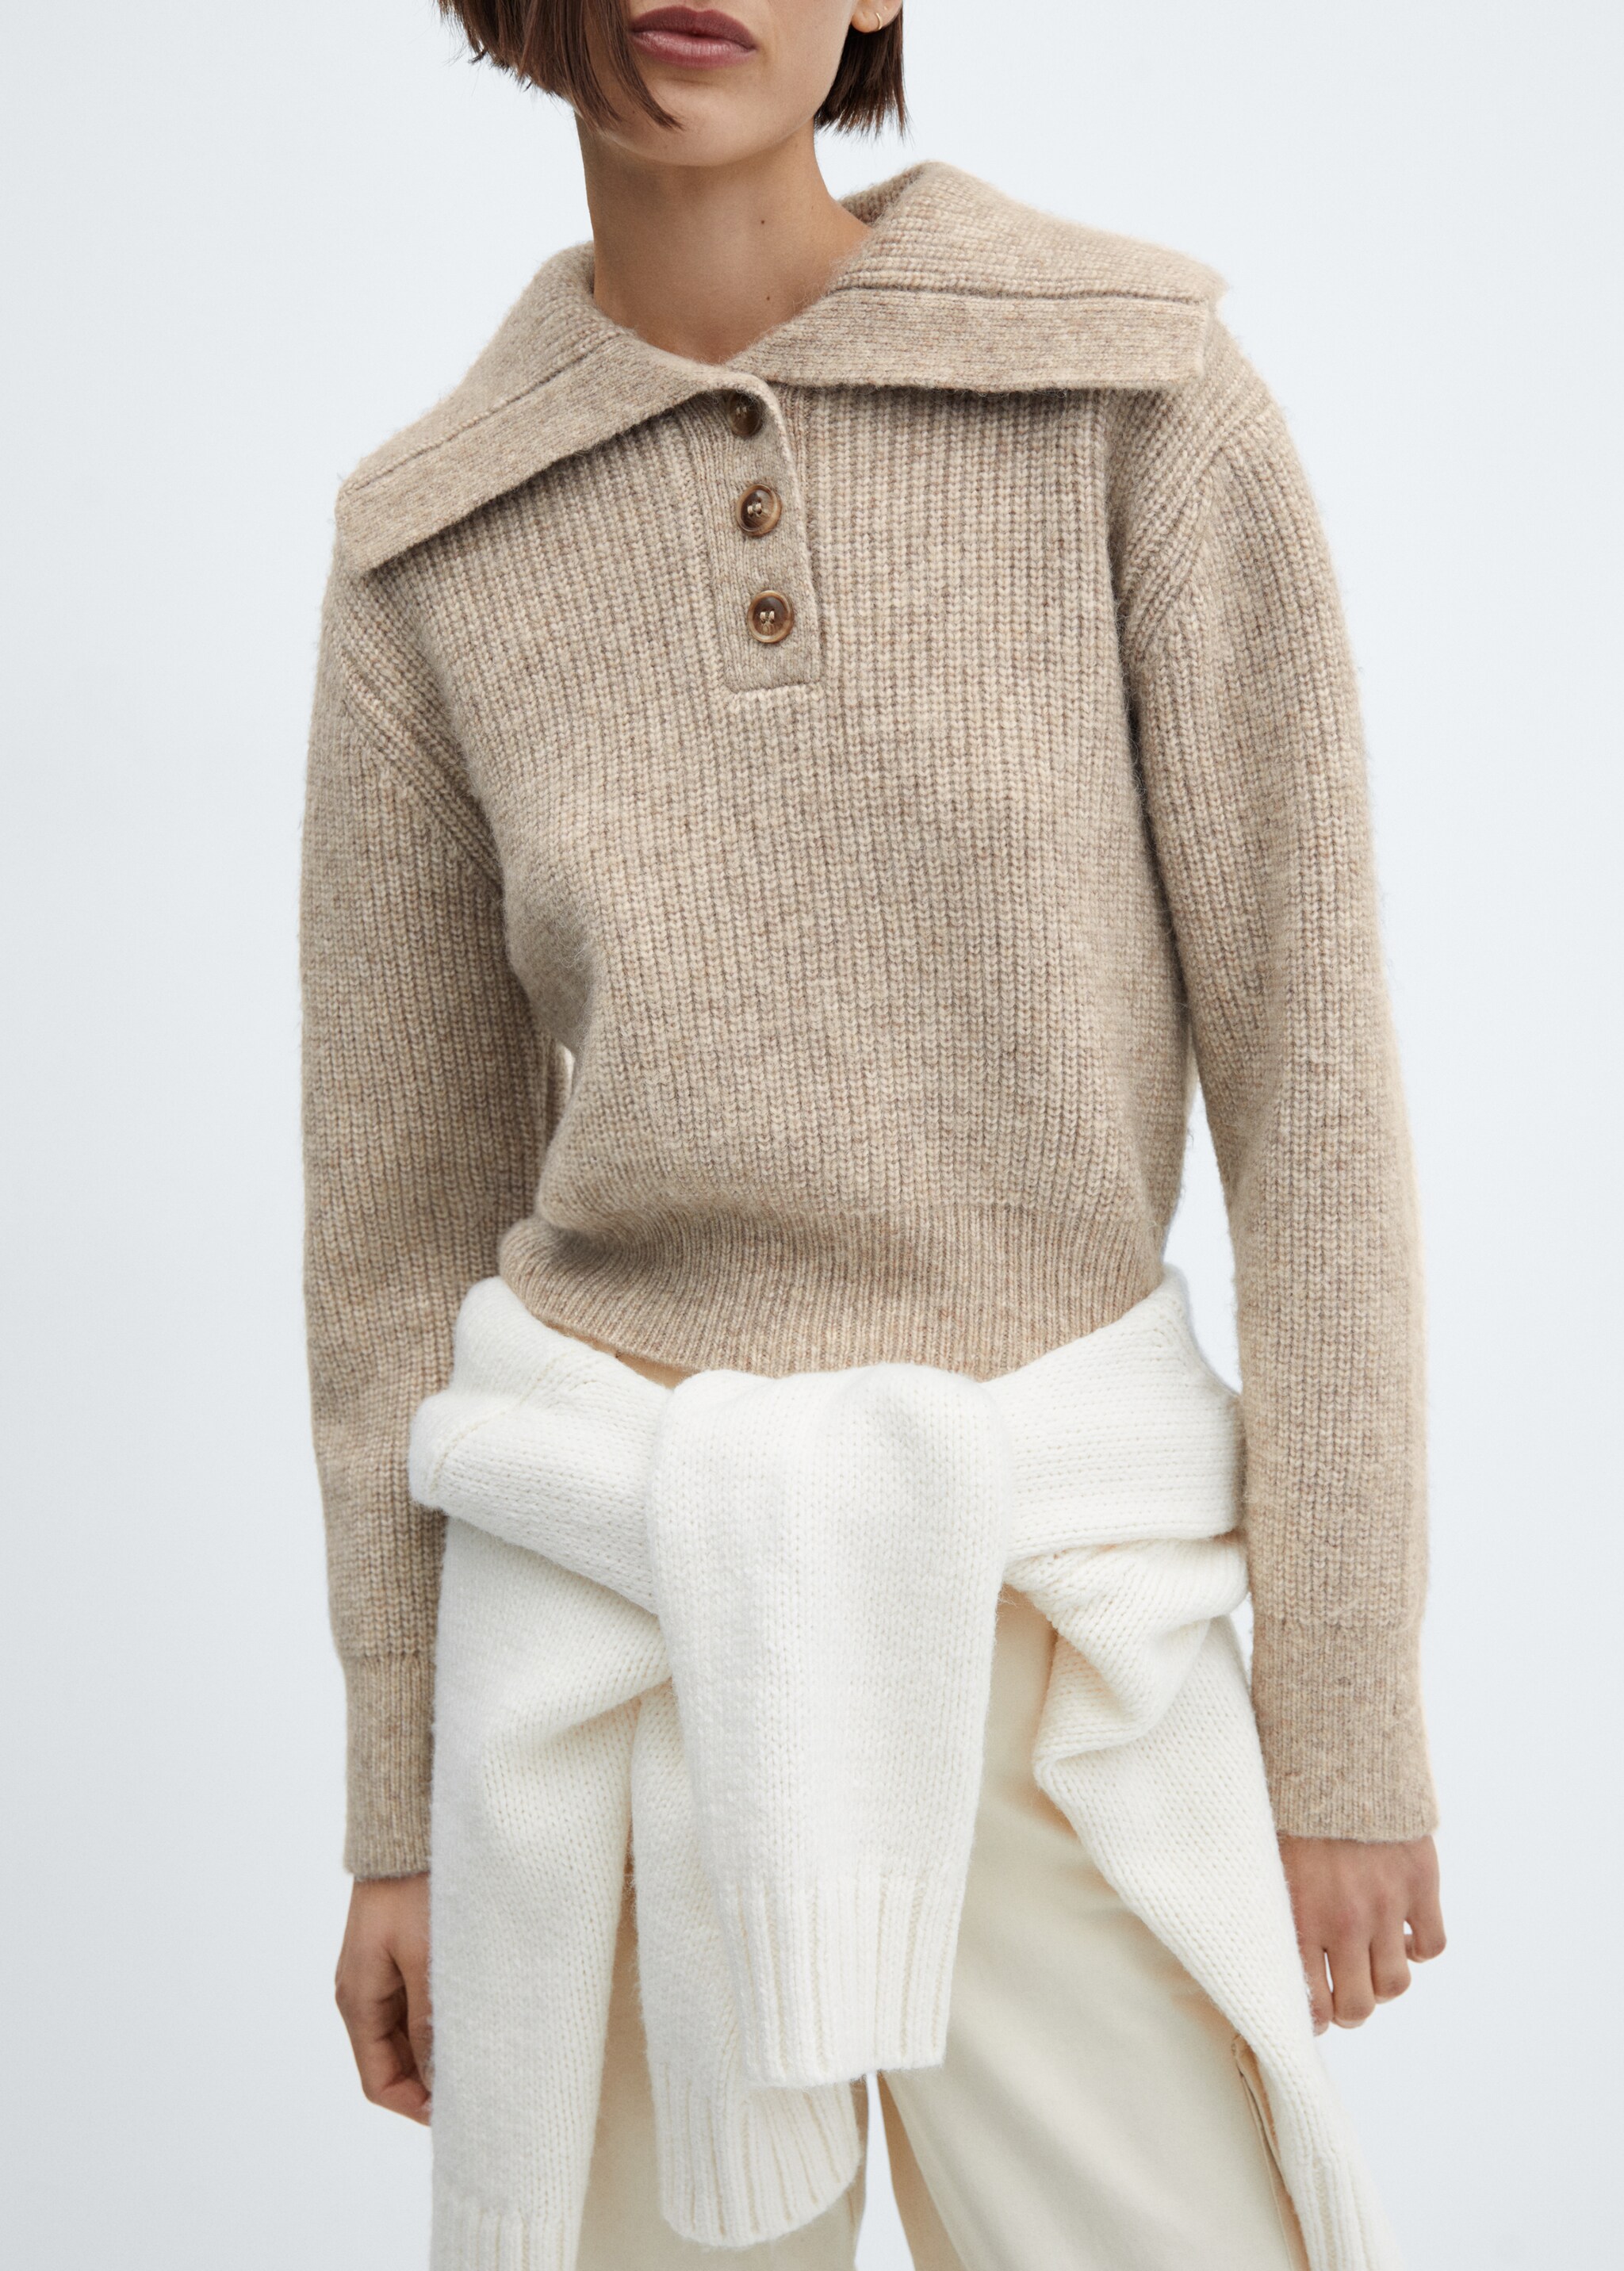 Camp-collar knit sweater - Details of the article 6